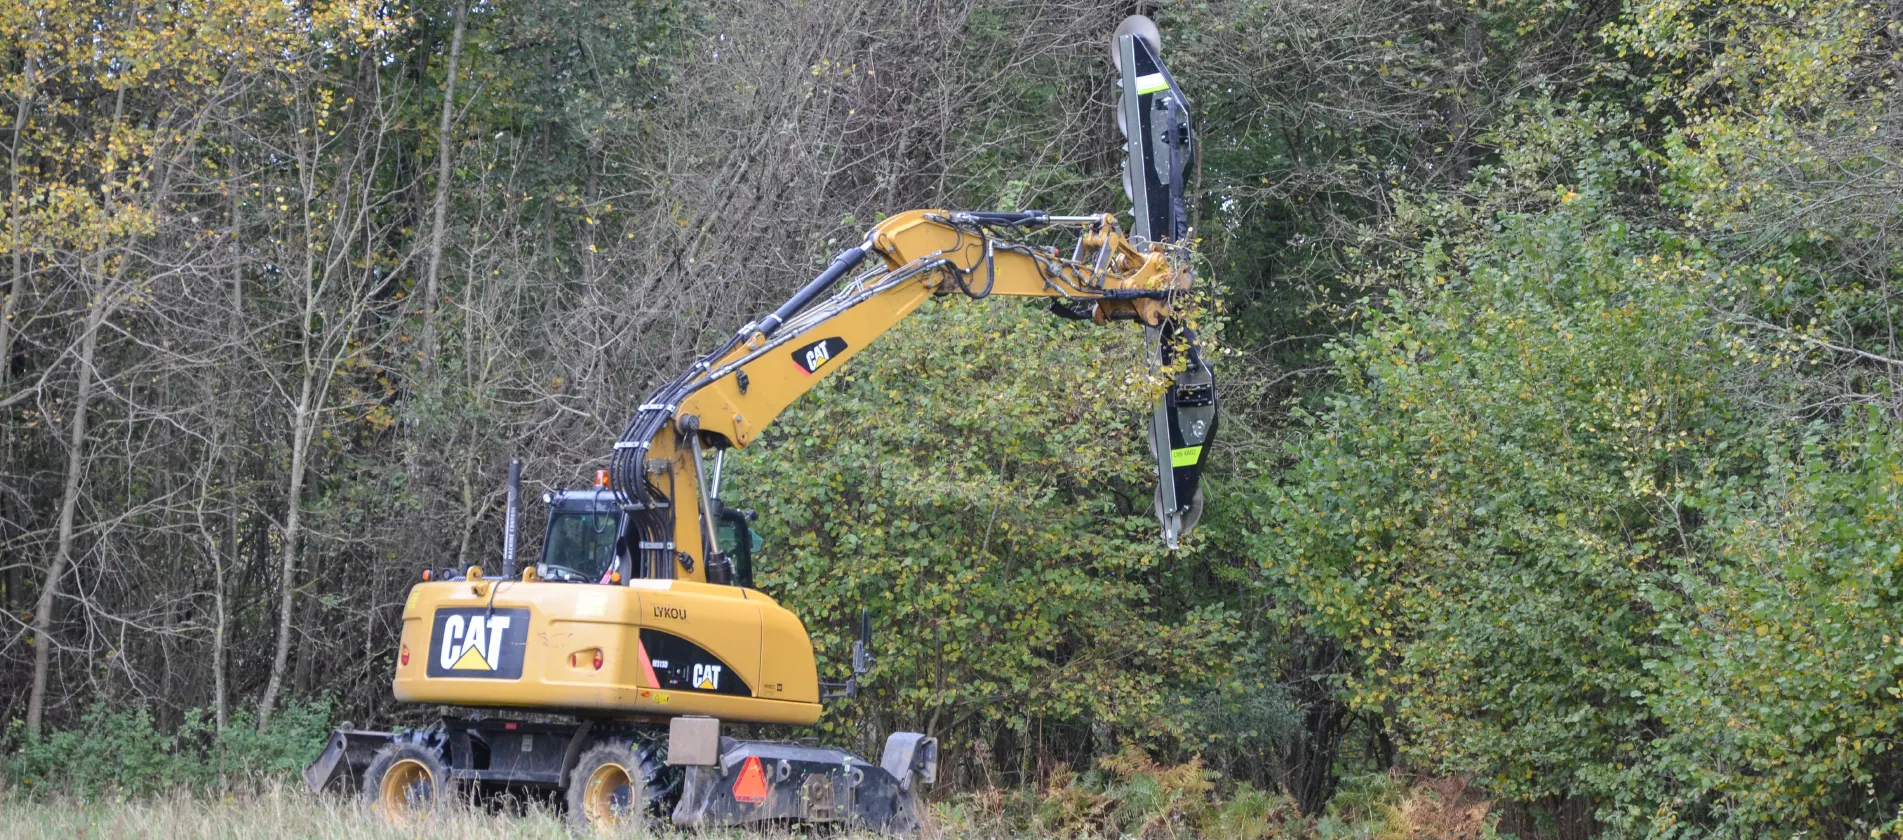 Hydraulic tree saw mounted on a CAT M313D excavator